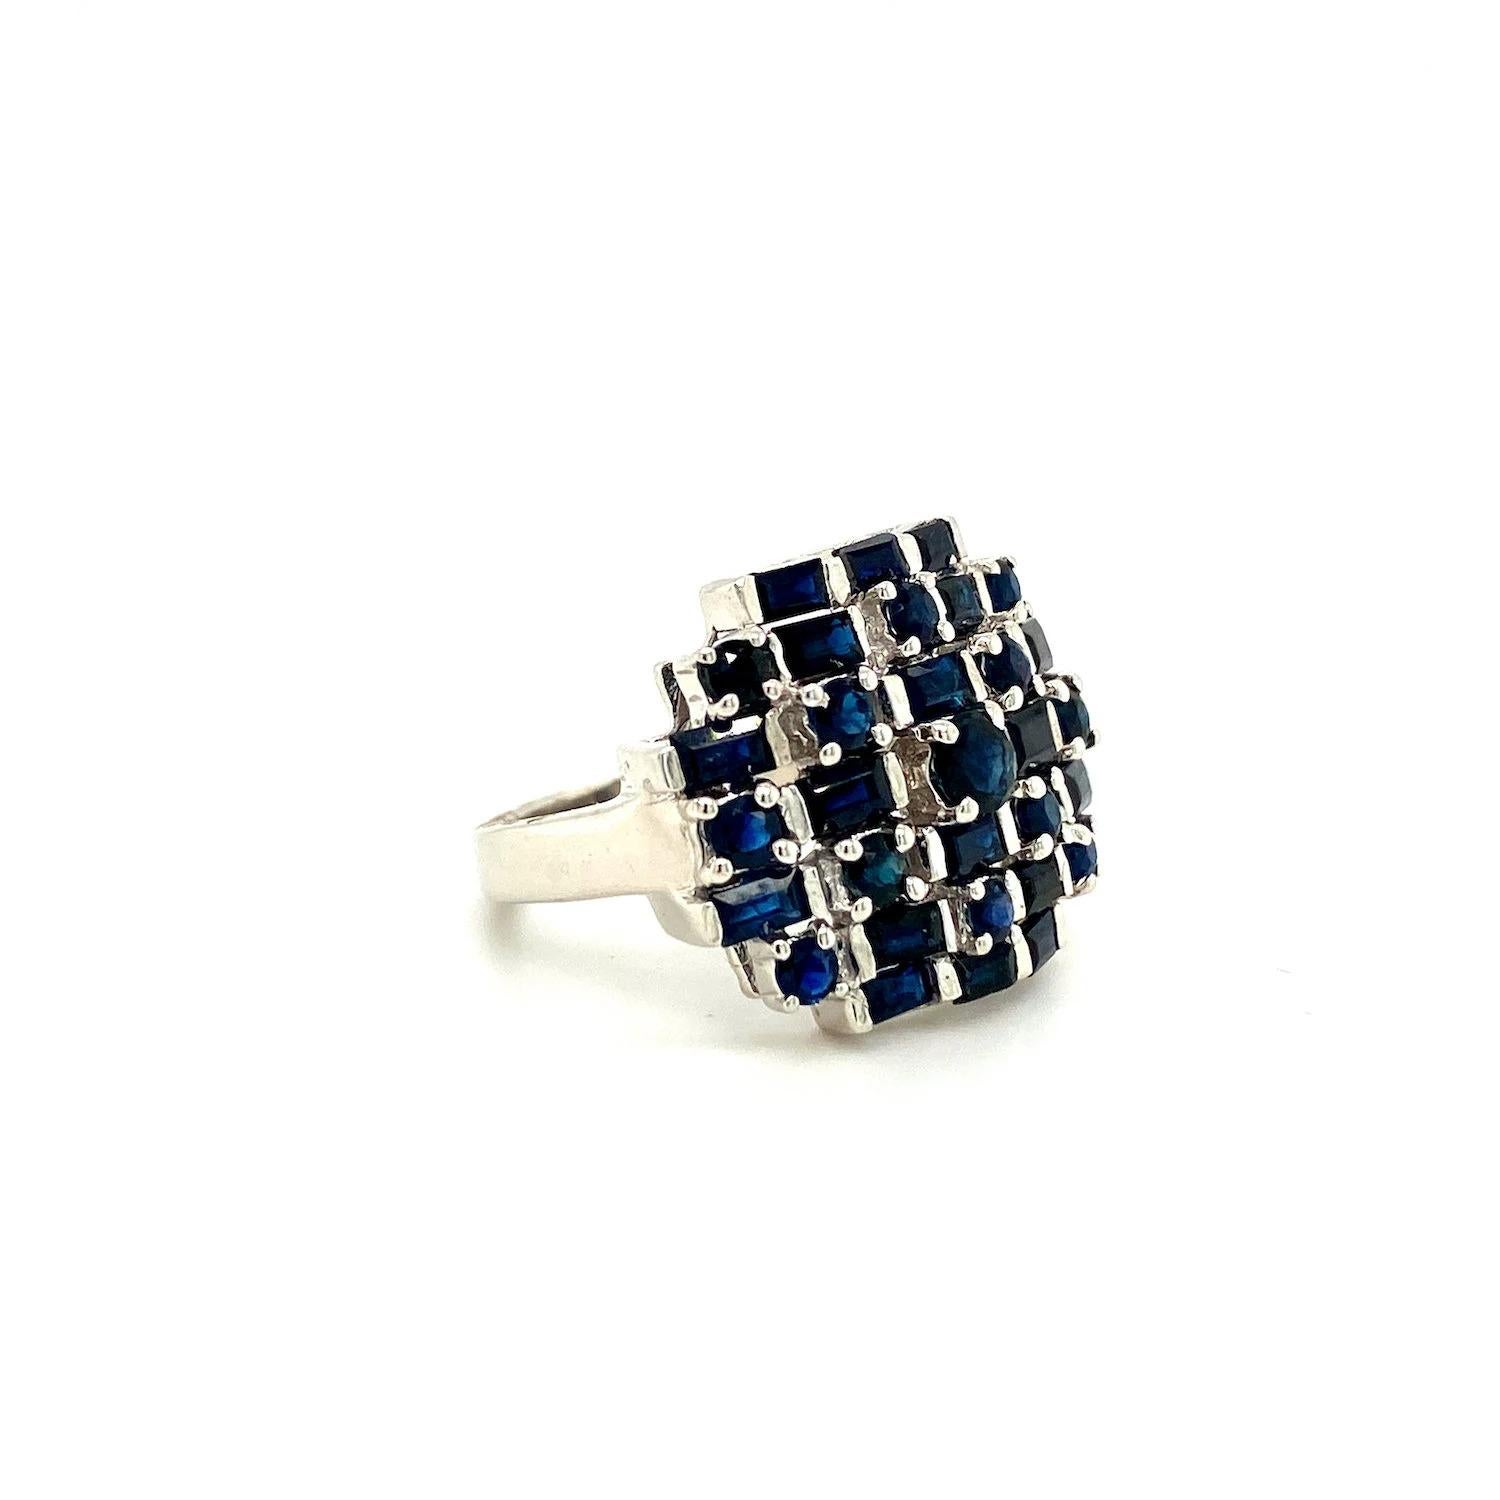 For Sale:  Statement 3.41 ct Blue Sapphire Cluster Bombe Ring 925 Sterling Silver 3